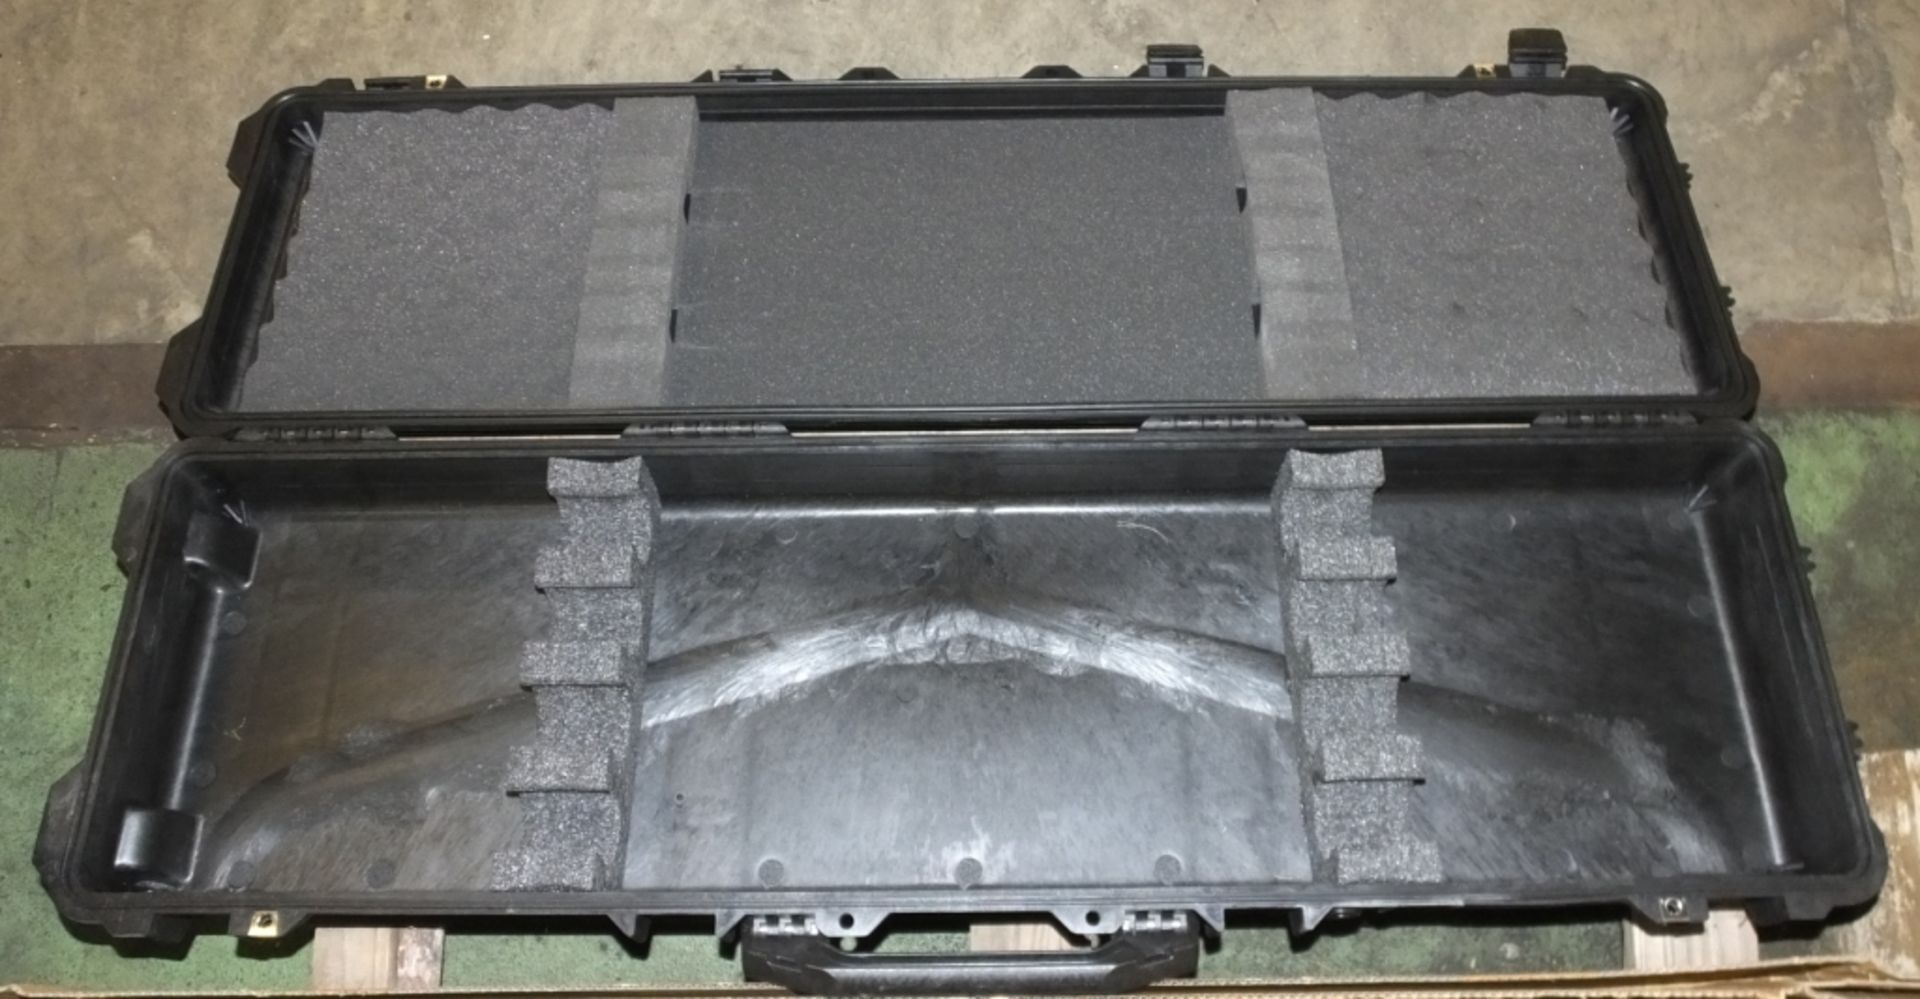 Jameson Heavy duty carry case - 1280 x 380 - Image 2 of 2